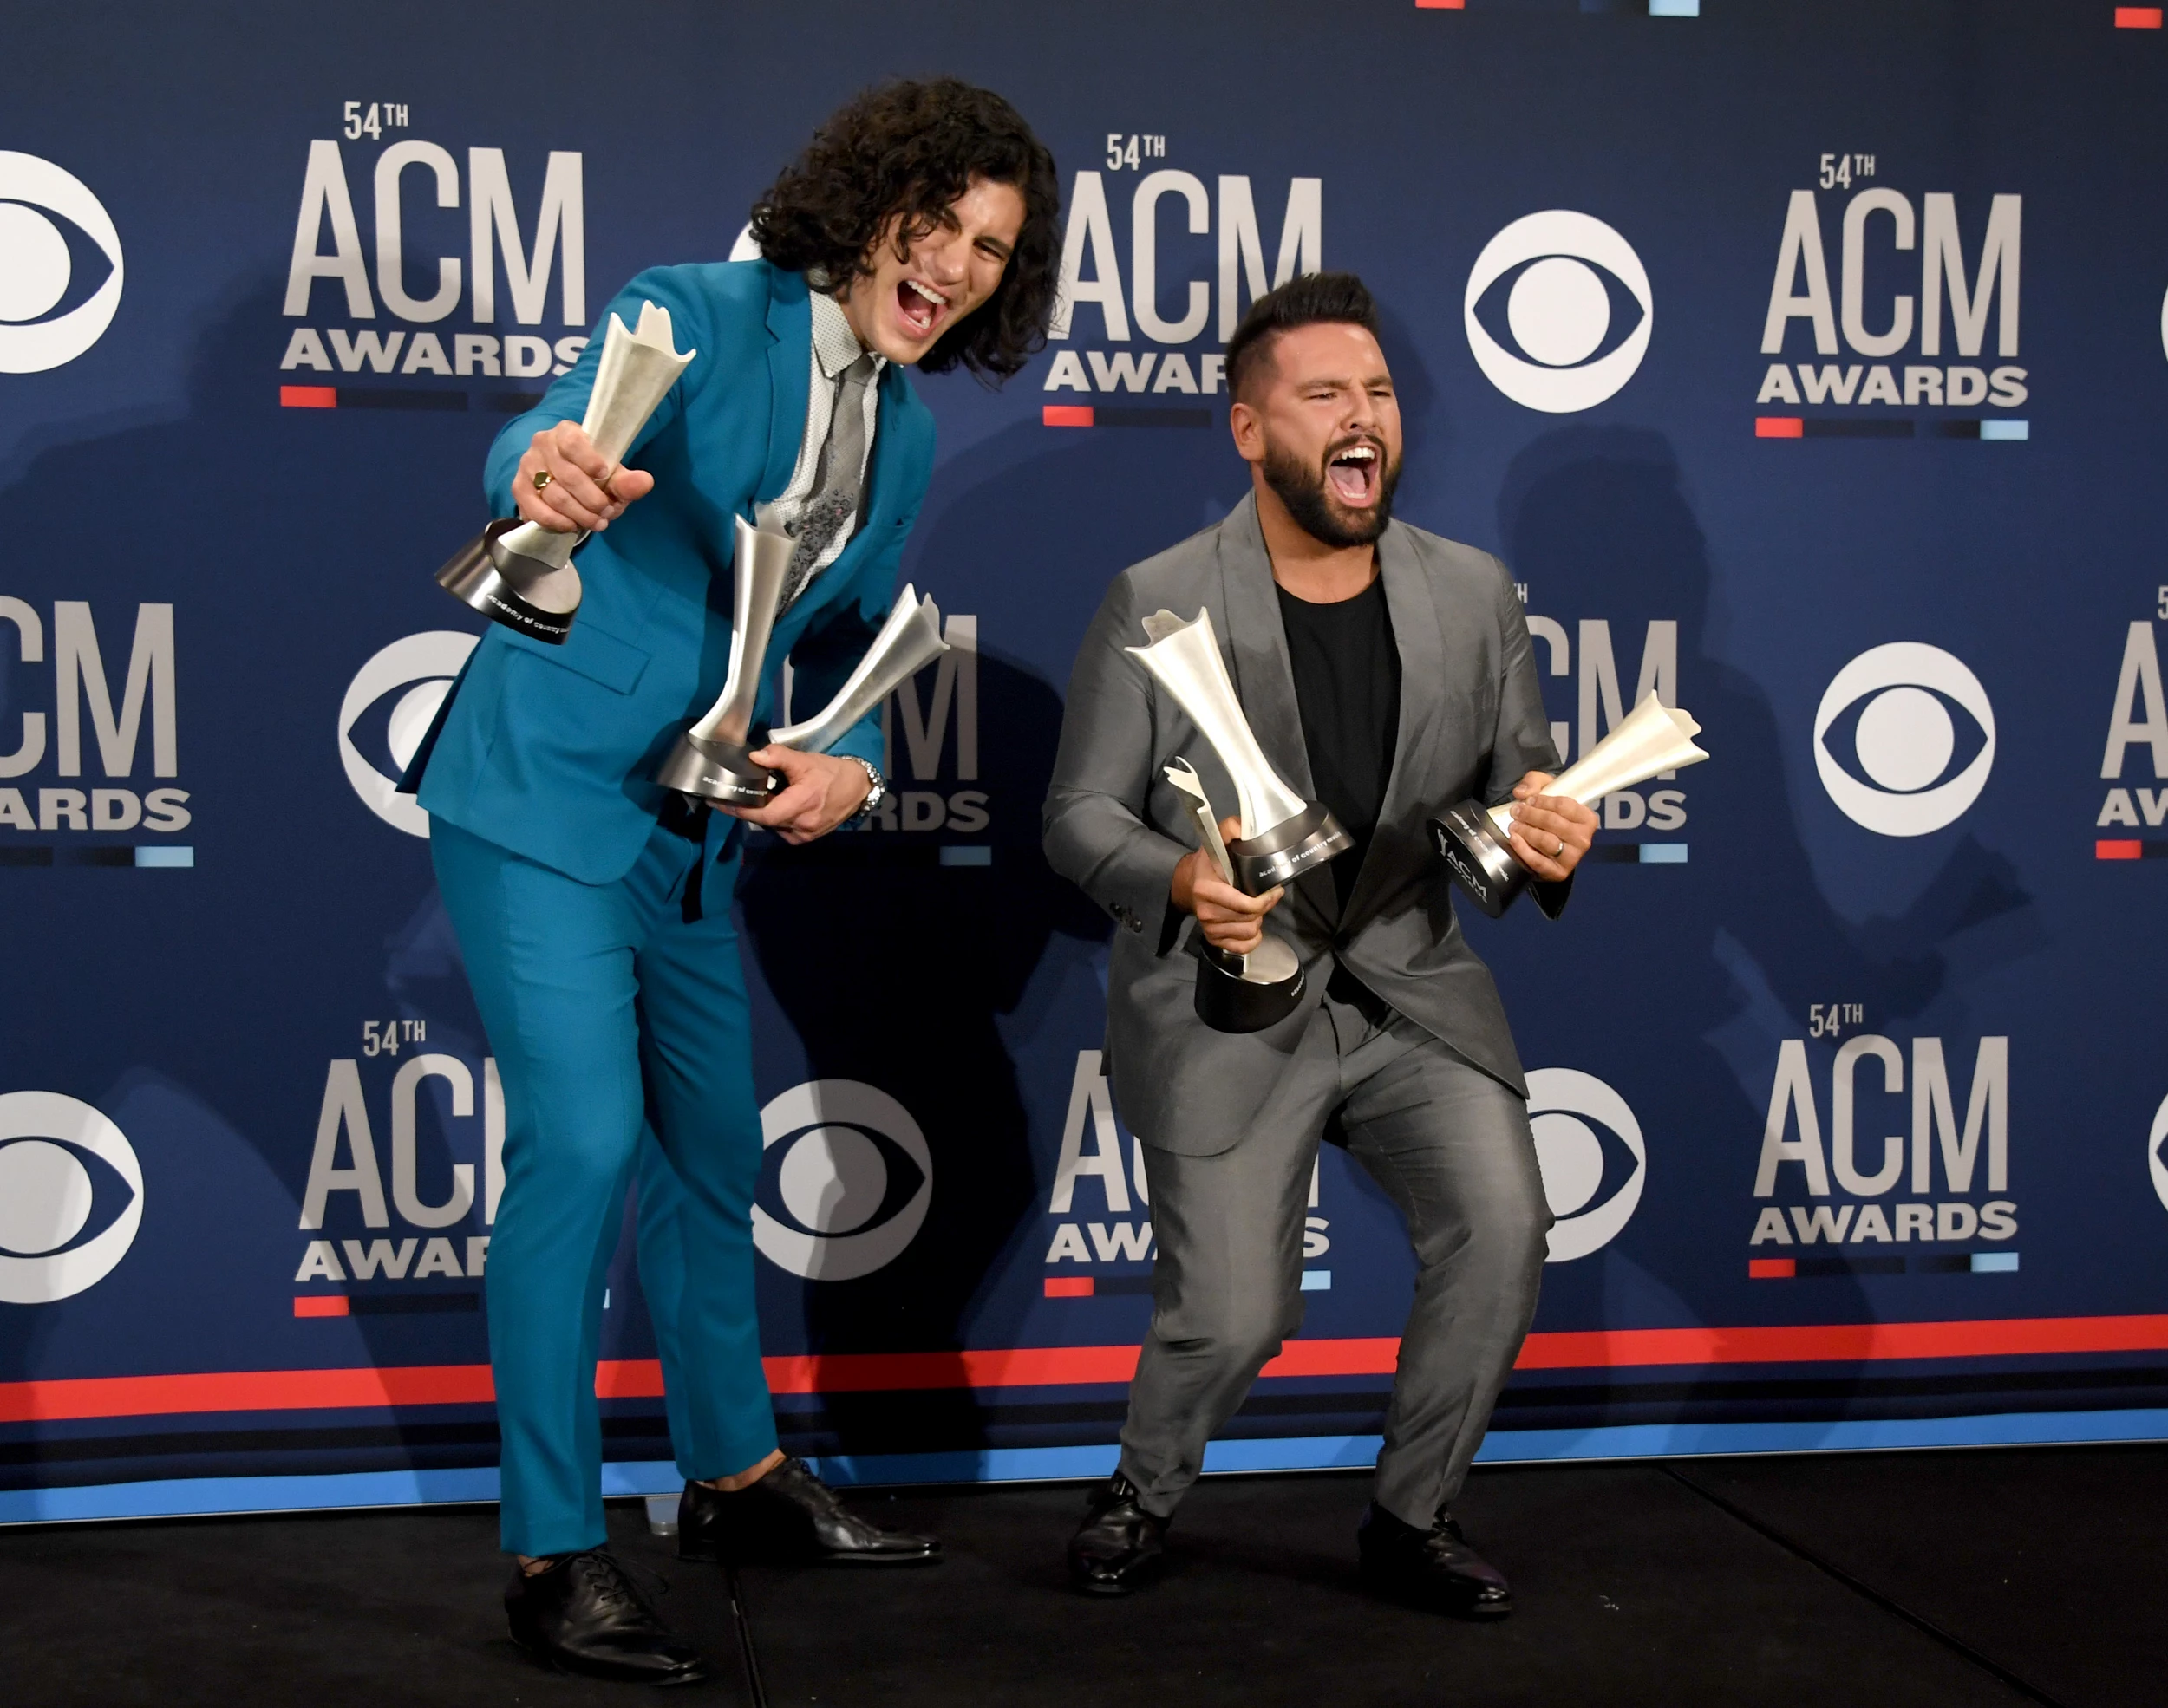 ACMs 2020: Riley Green on Winning New Artist of the Year